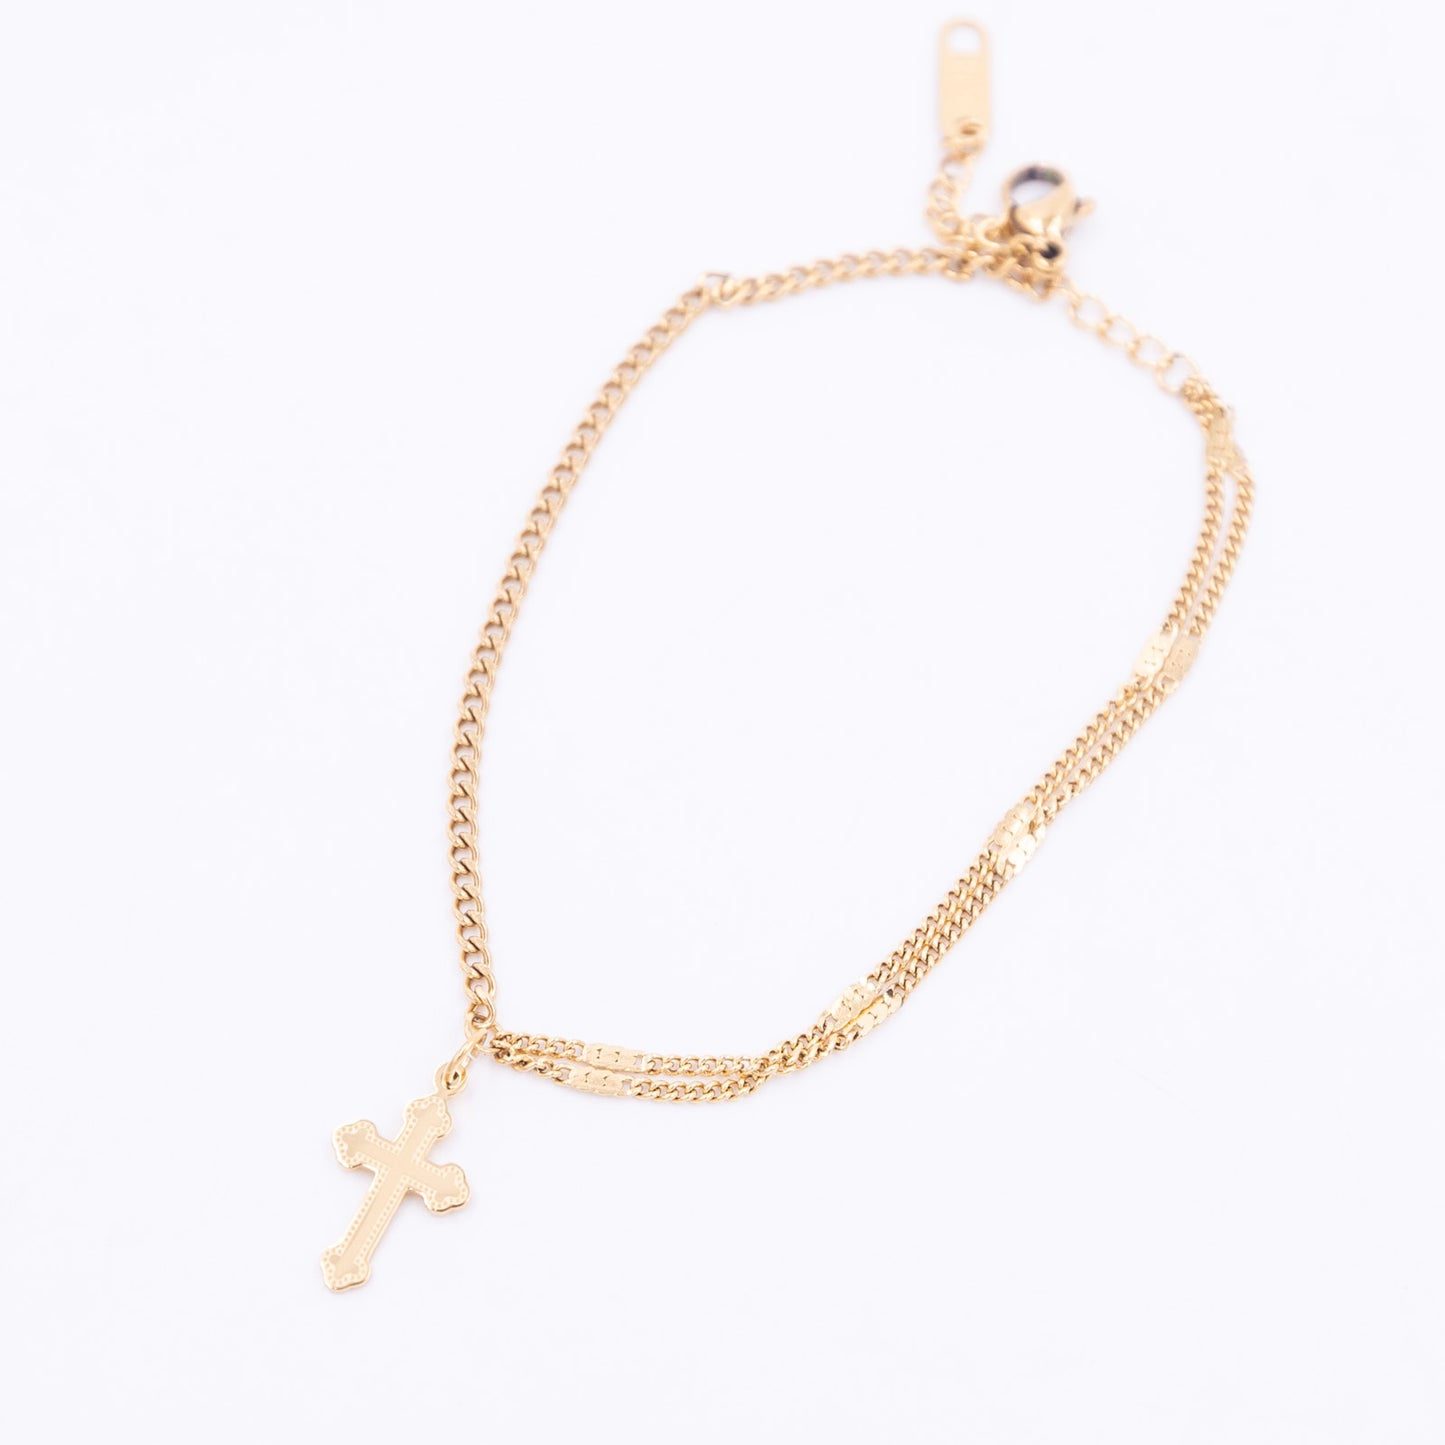 Chic Gold Plated Cross Charm Bracelet Adjustable Size